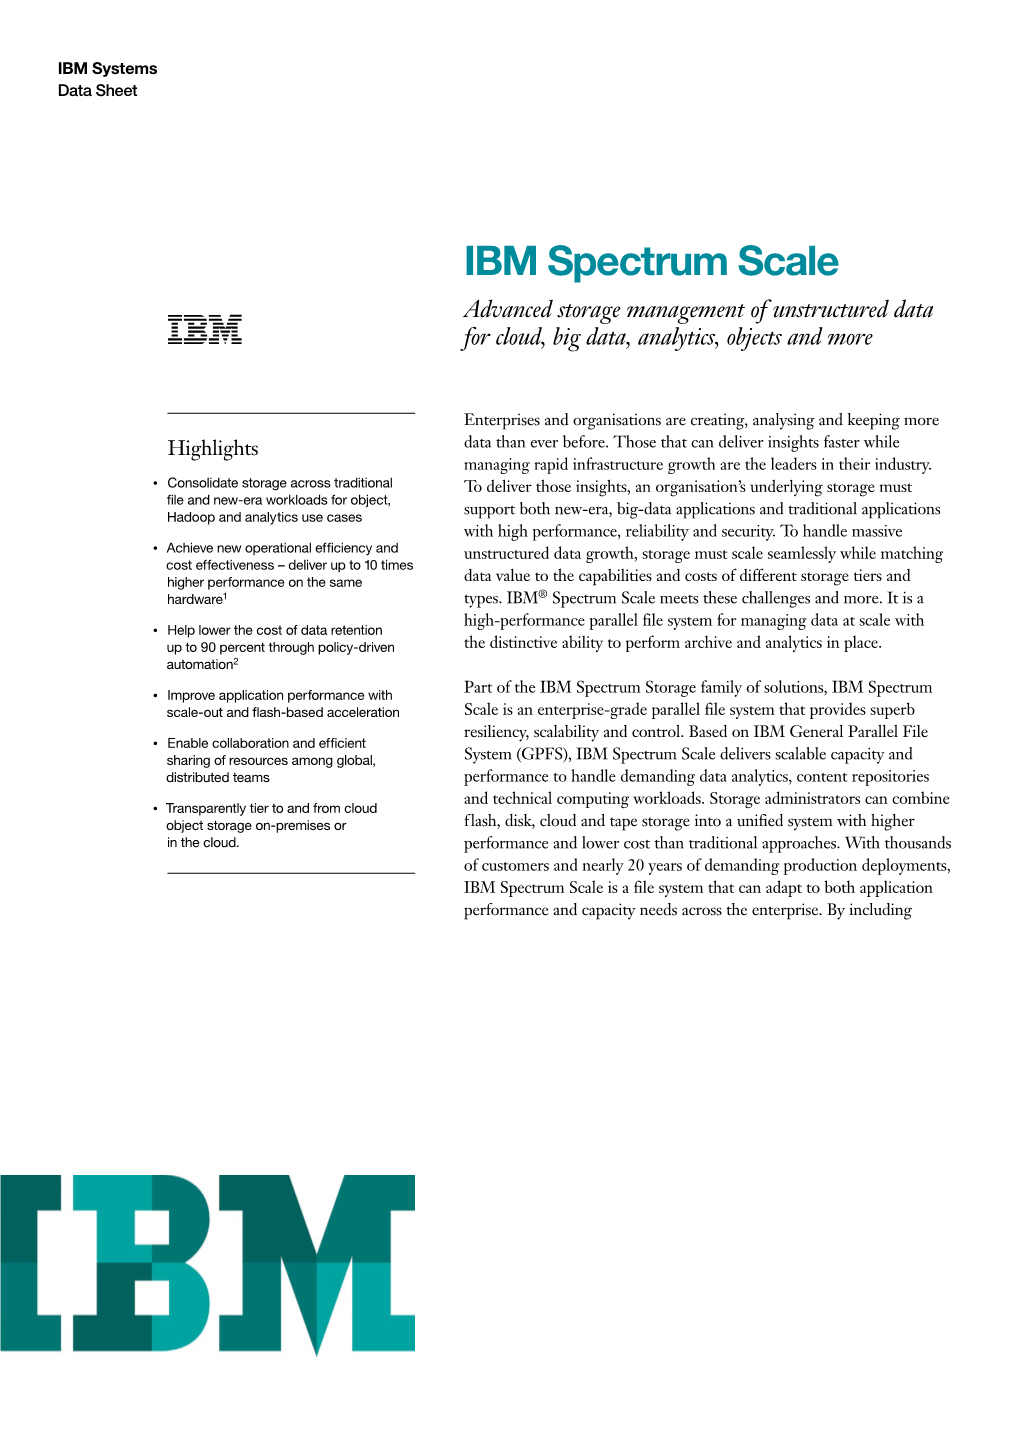 IBM Spectrum Scale Advanced Storage Management of Unstructured Data for Cloud, Big Data, Analytics, Objects and More